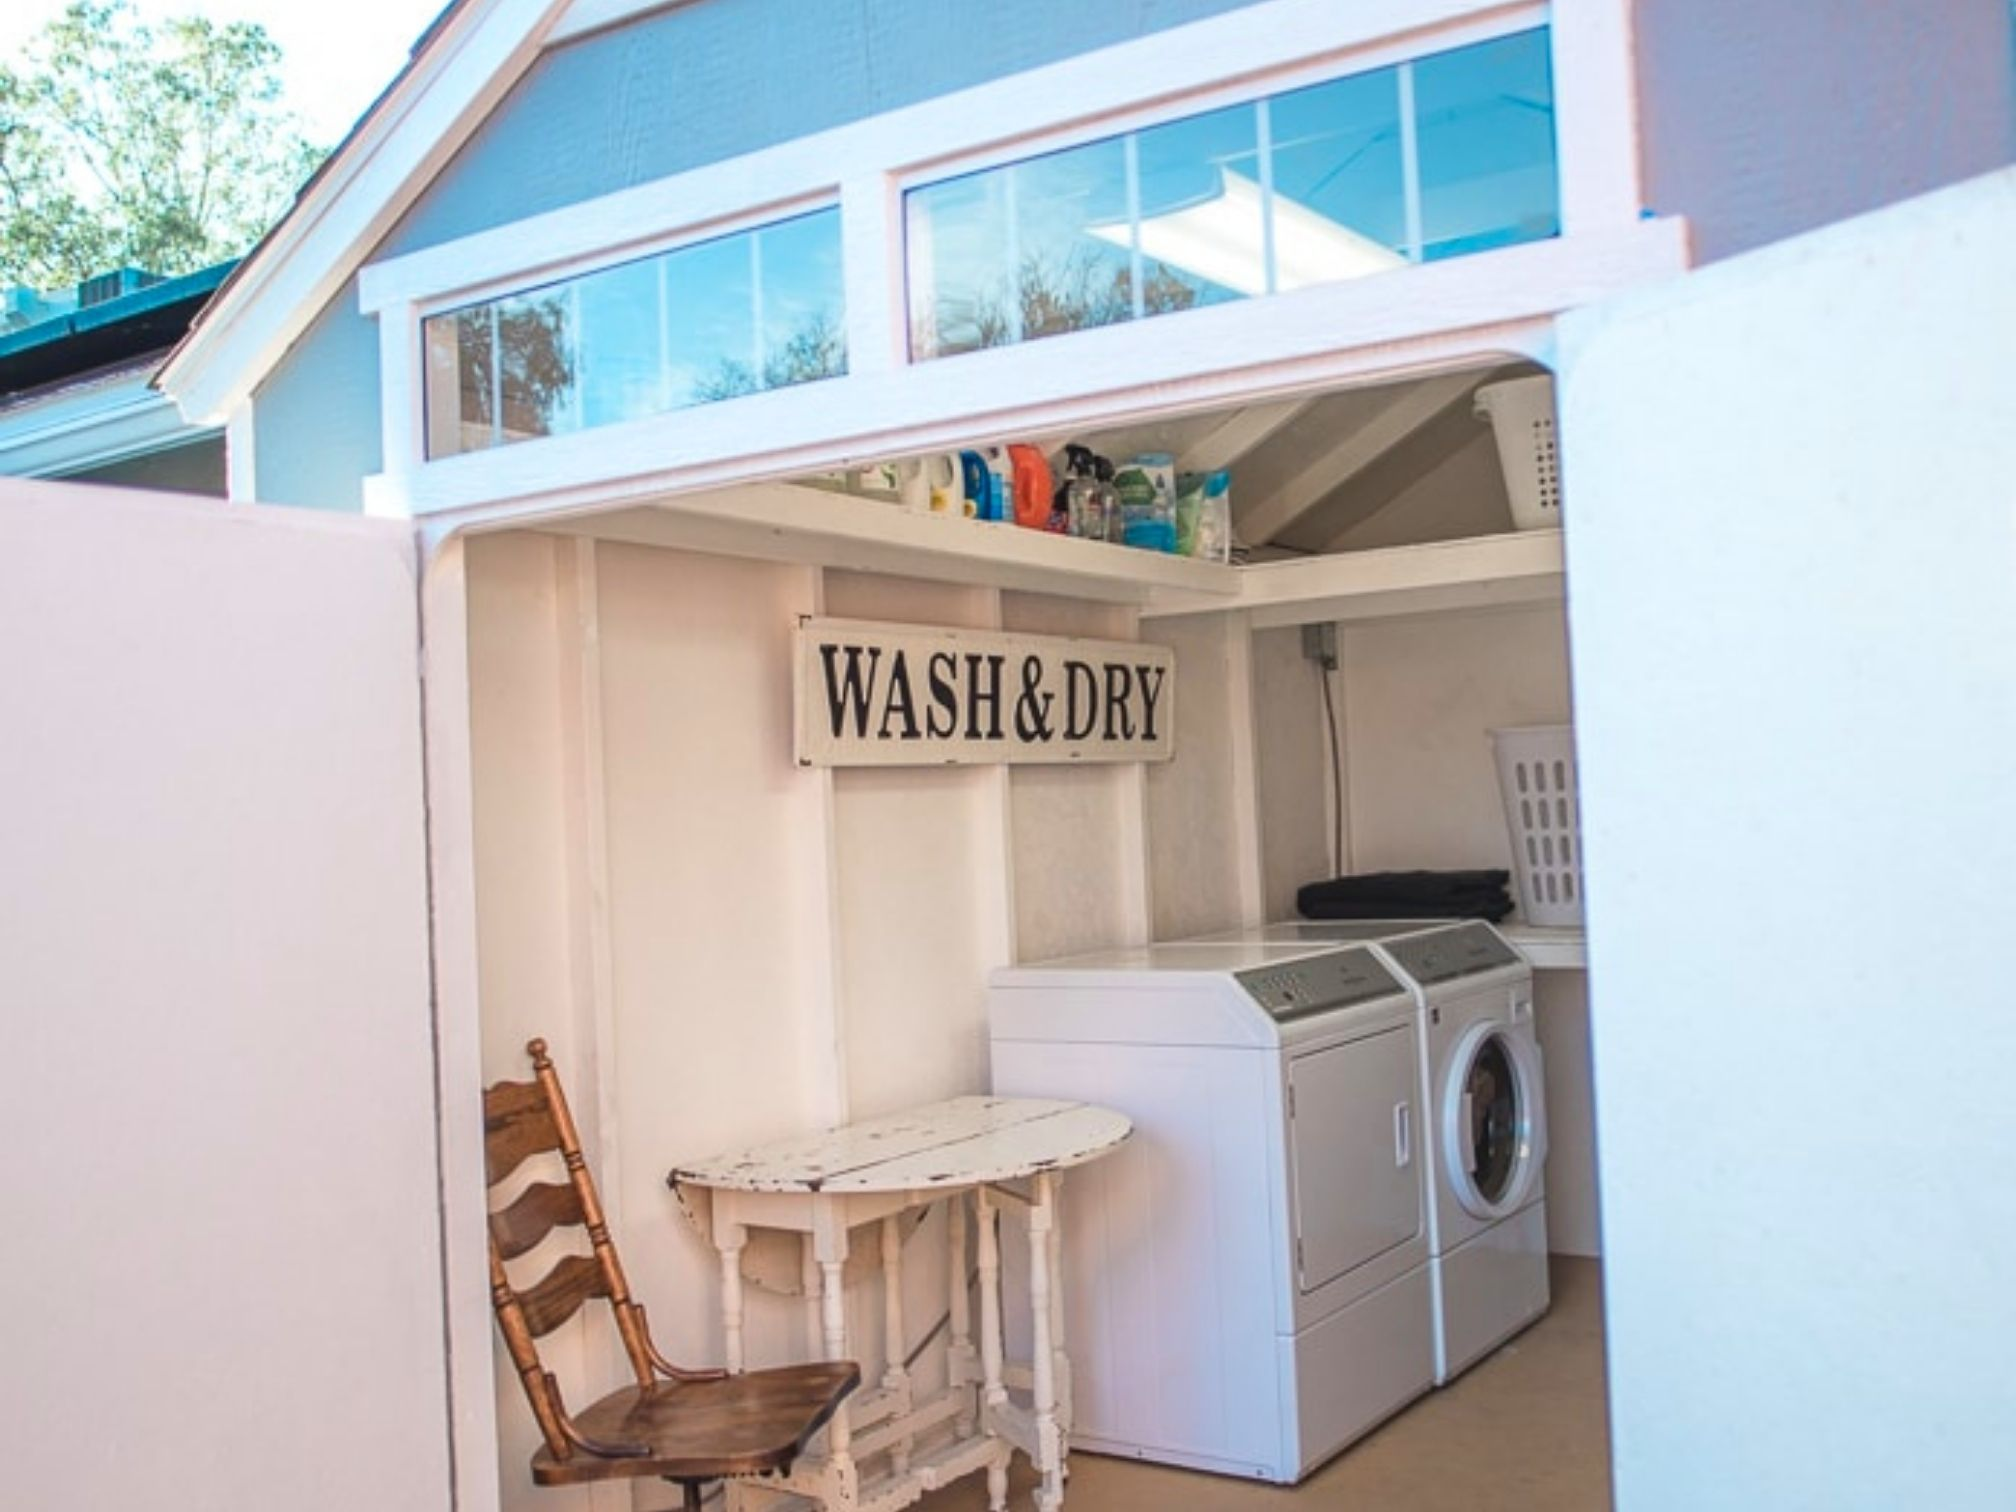 shed laundry room with washer and dryer inside